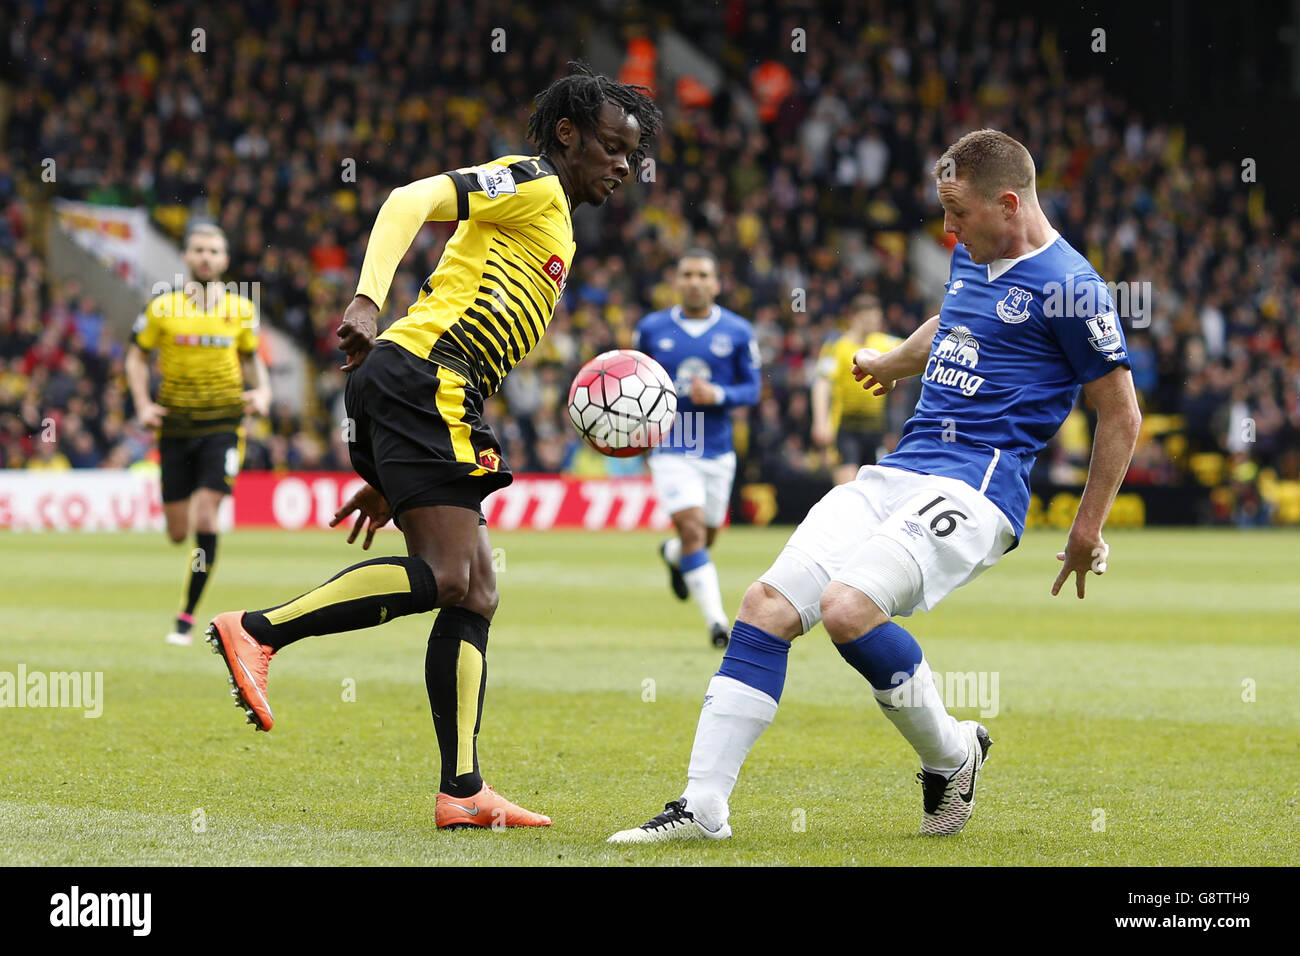 Everton's James McCarthy (right) and Watford's Juan Carlos Paredes battle for the ball during the Barclays Premier League match at Vicarage Road, Watford. Stock Photo